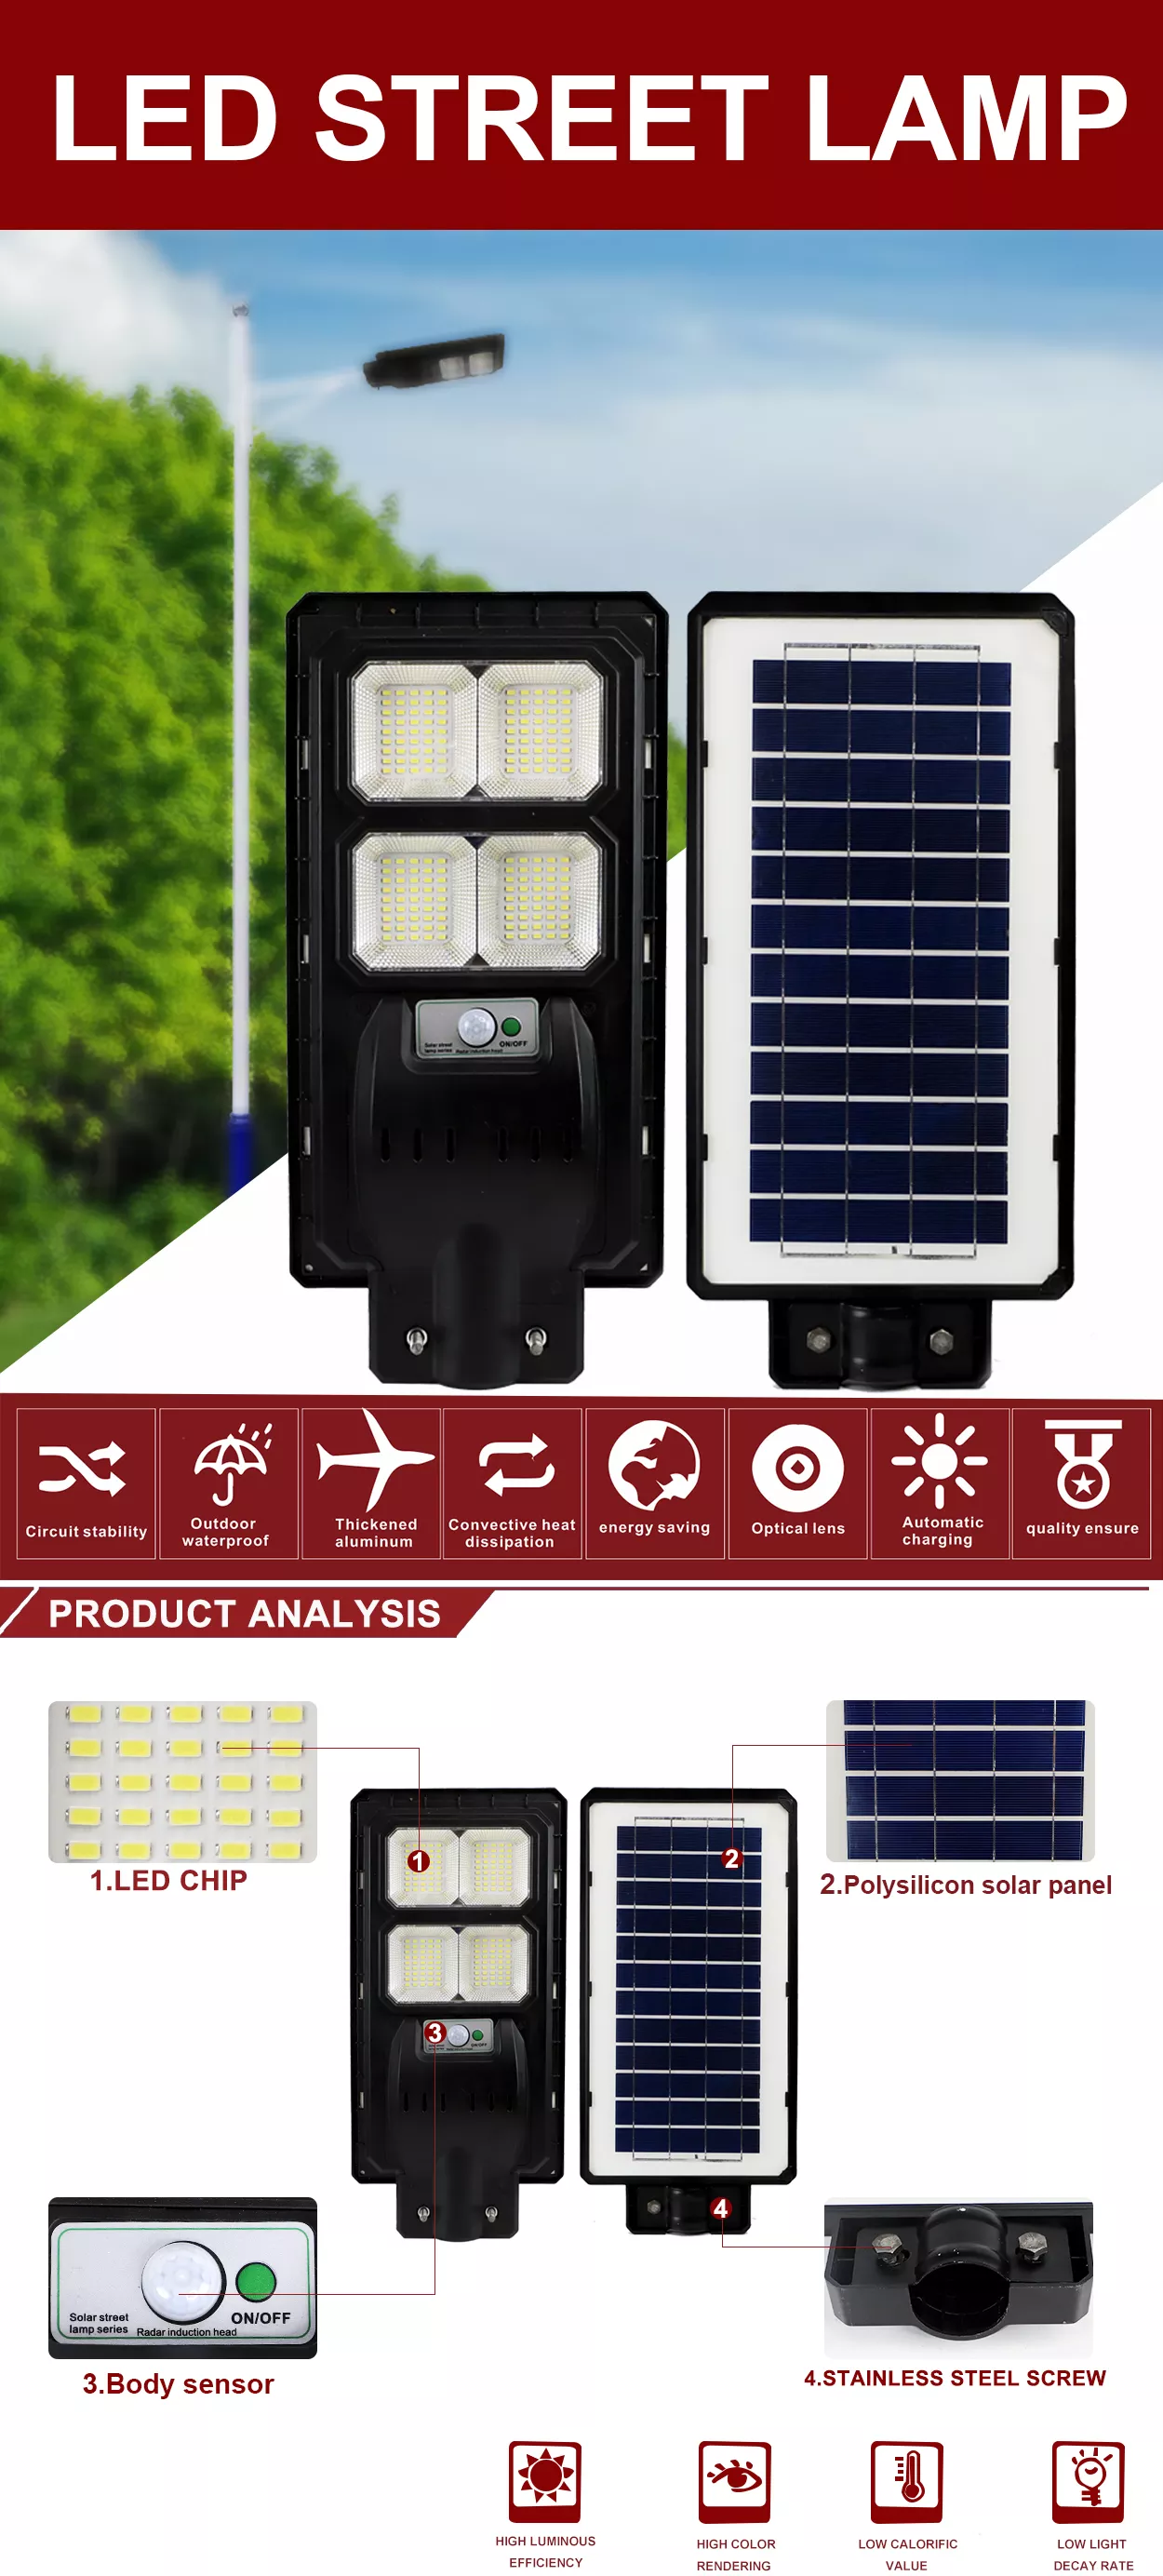 Outdoor garden lighting manufacture price list ABS shell solar panel battery 30w 60w 90w 120w led solar street lights